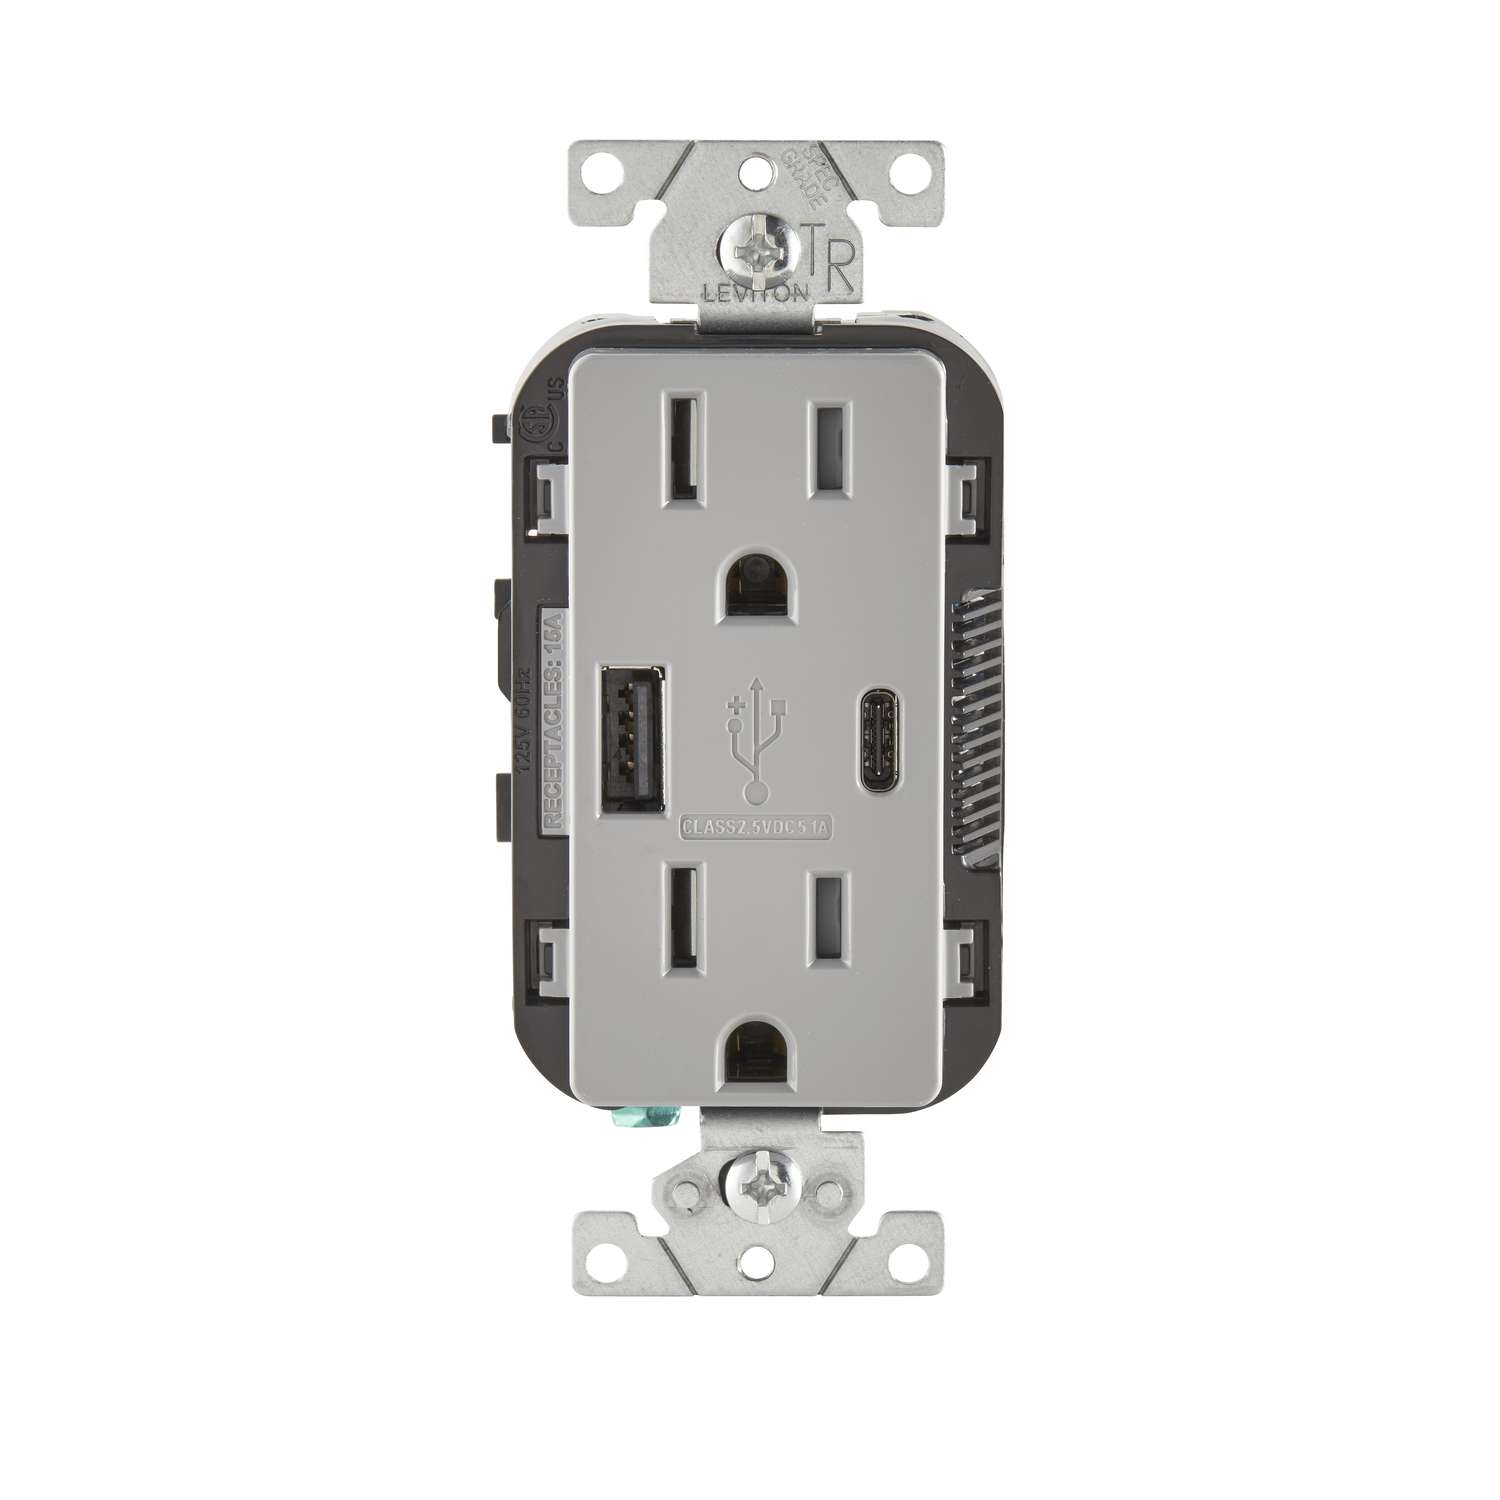 Leviton Decora 15 amps 125 volt Gray Outlet and USB Charger 5-15R 1 pk - Ace Hardware